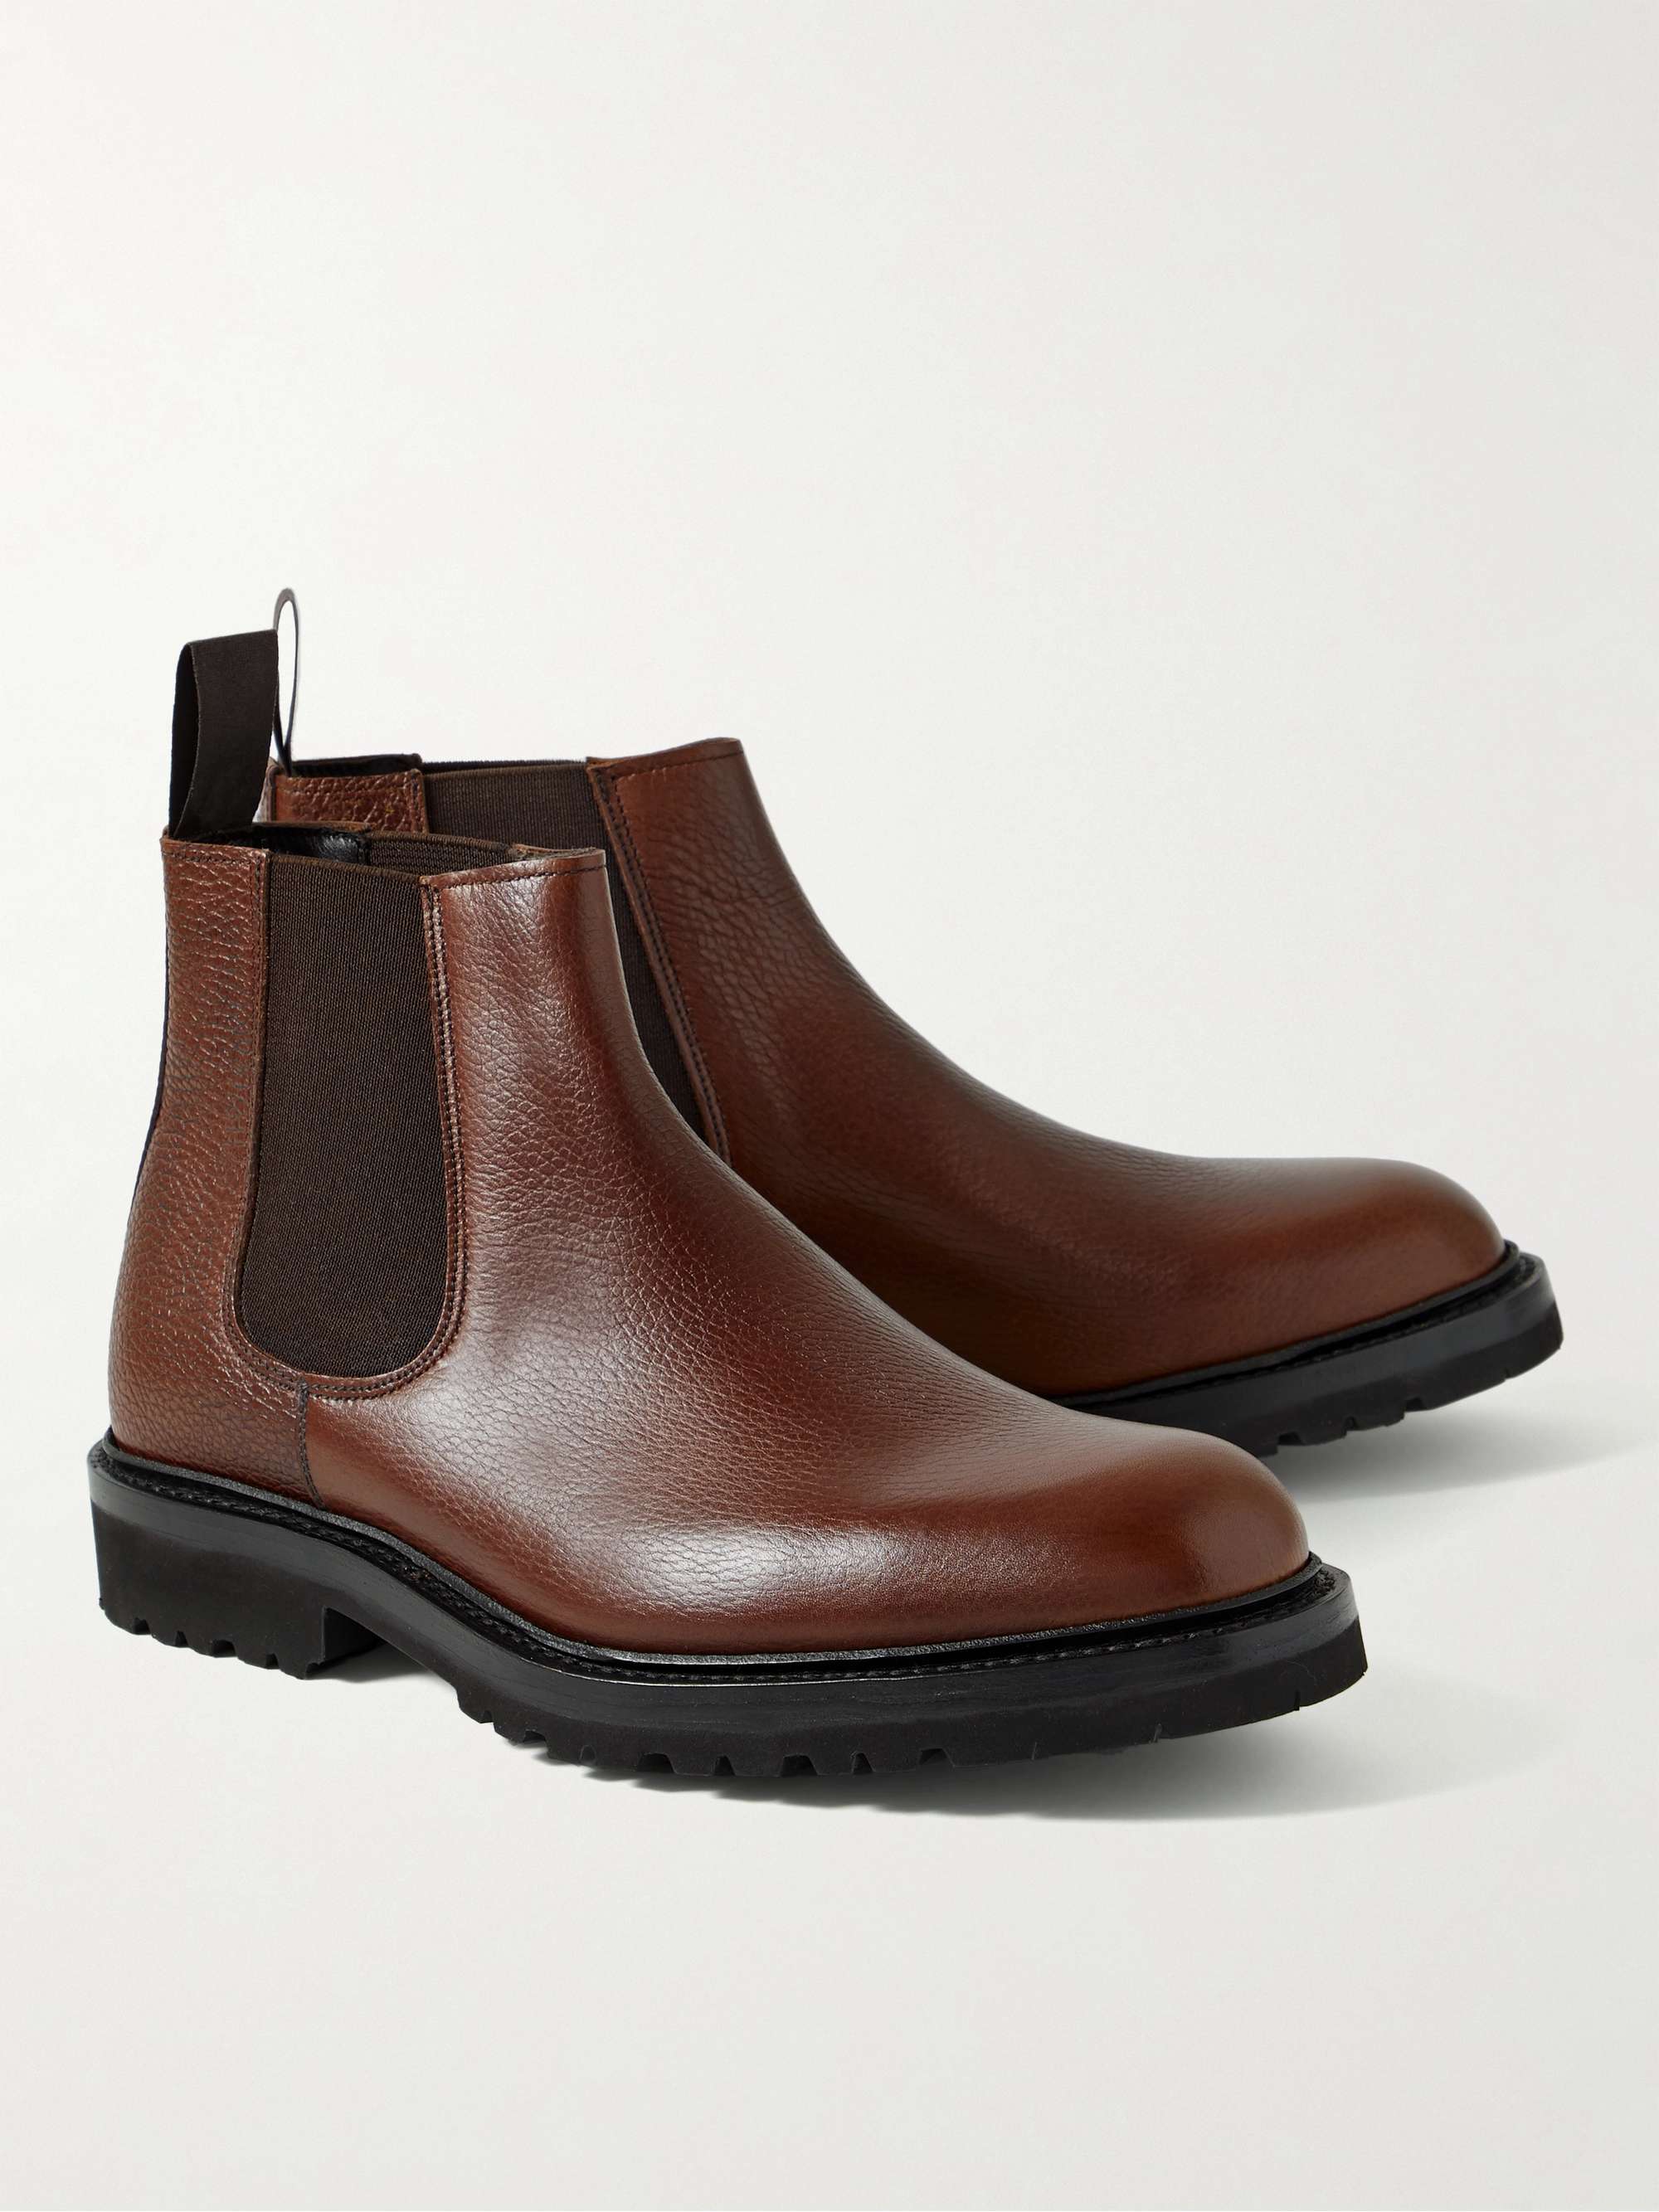 GEORGE CLEVERLEY Jason Full-Grain Leather Chelsea Boots